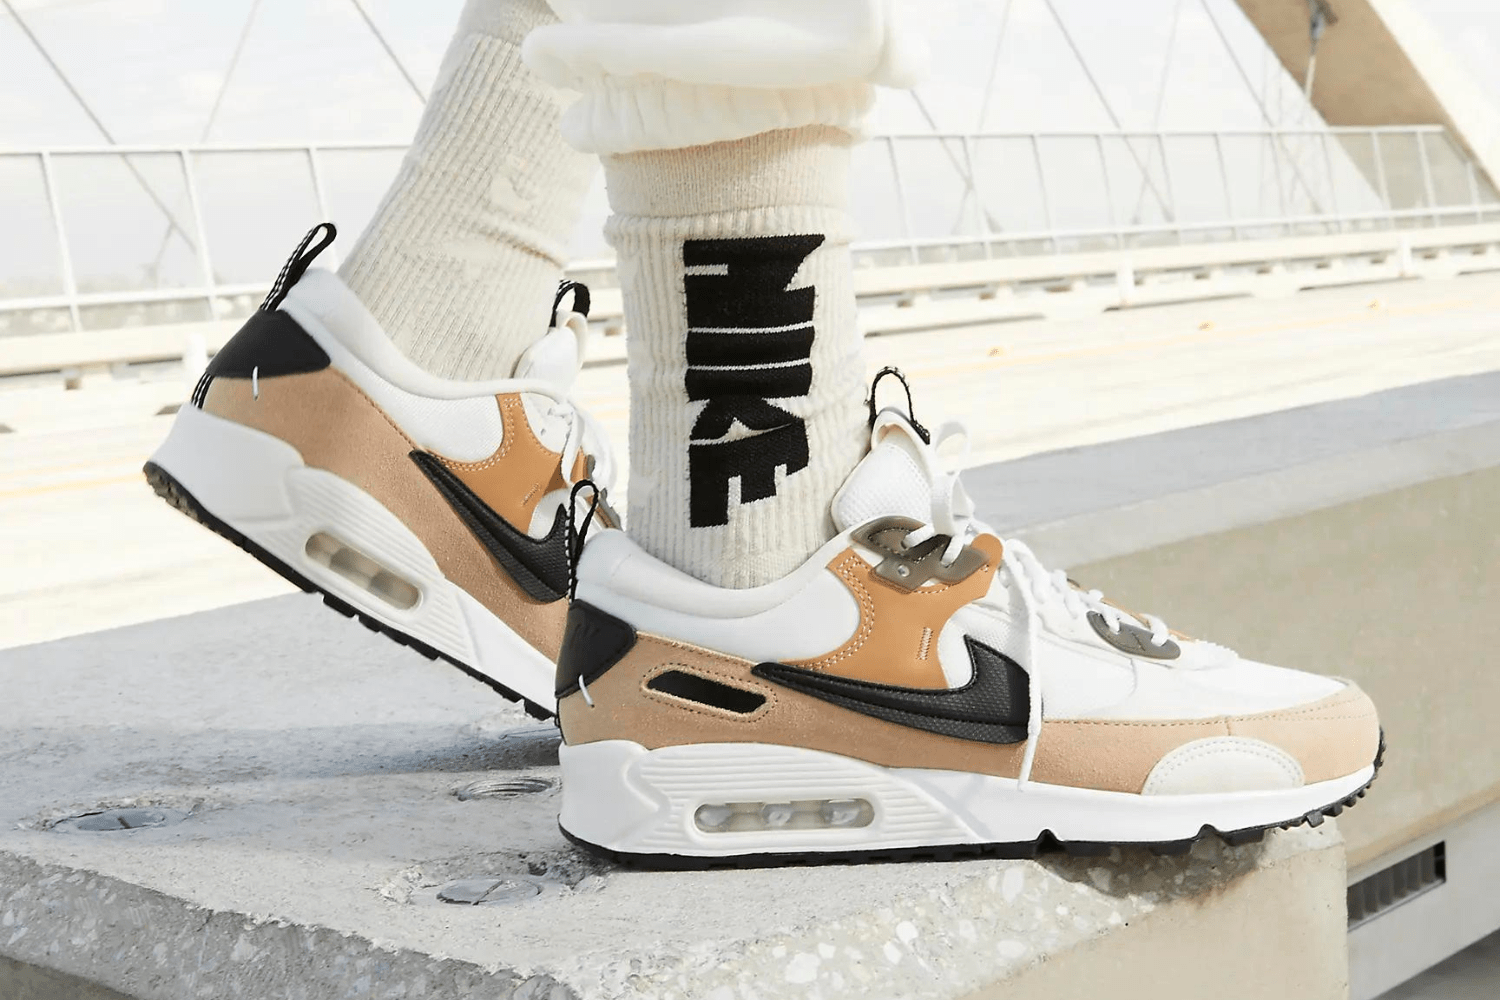 Discover the most popular Nike Air Max 90 Futura WMNS colorways